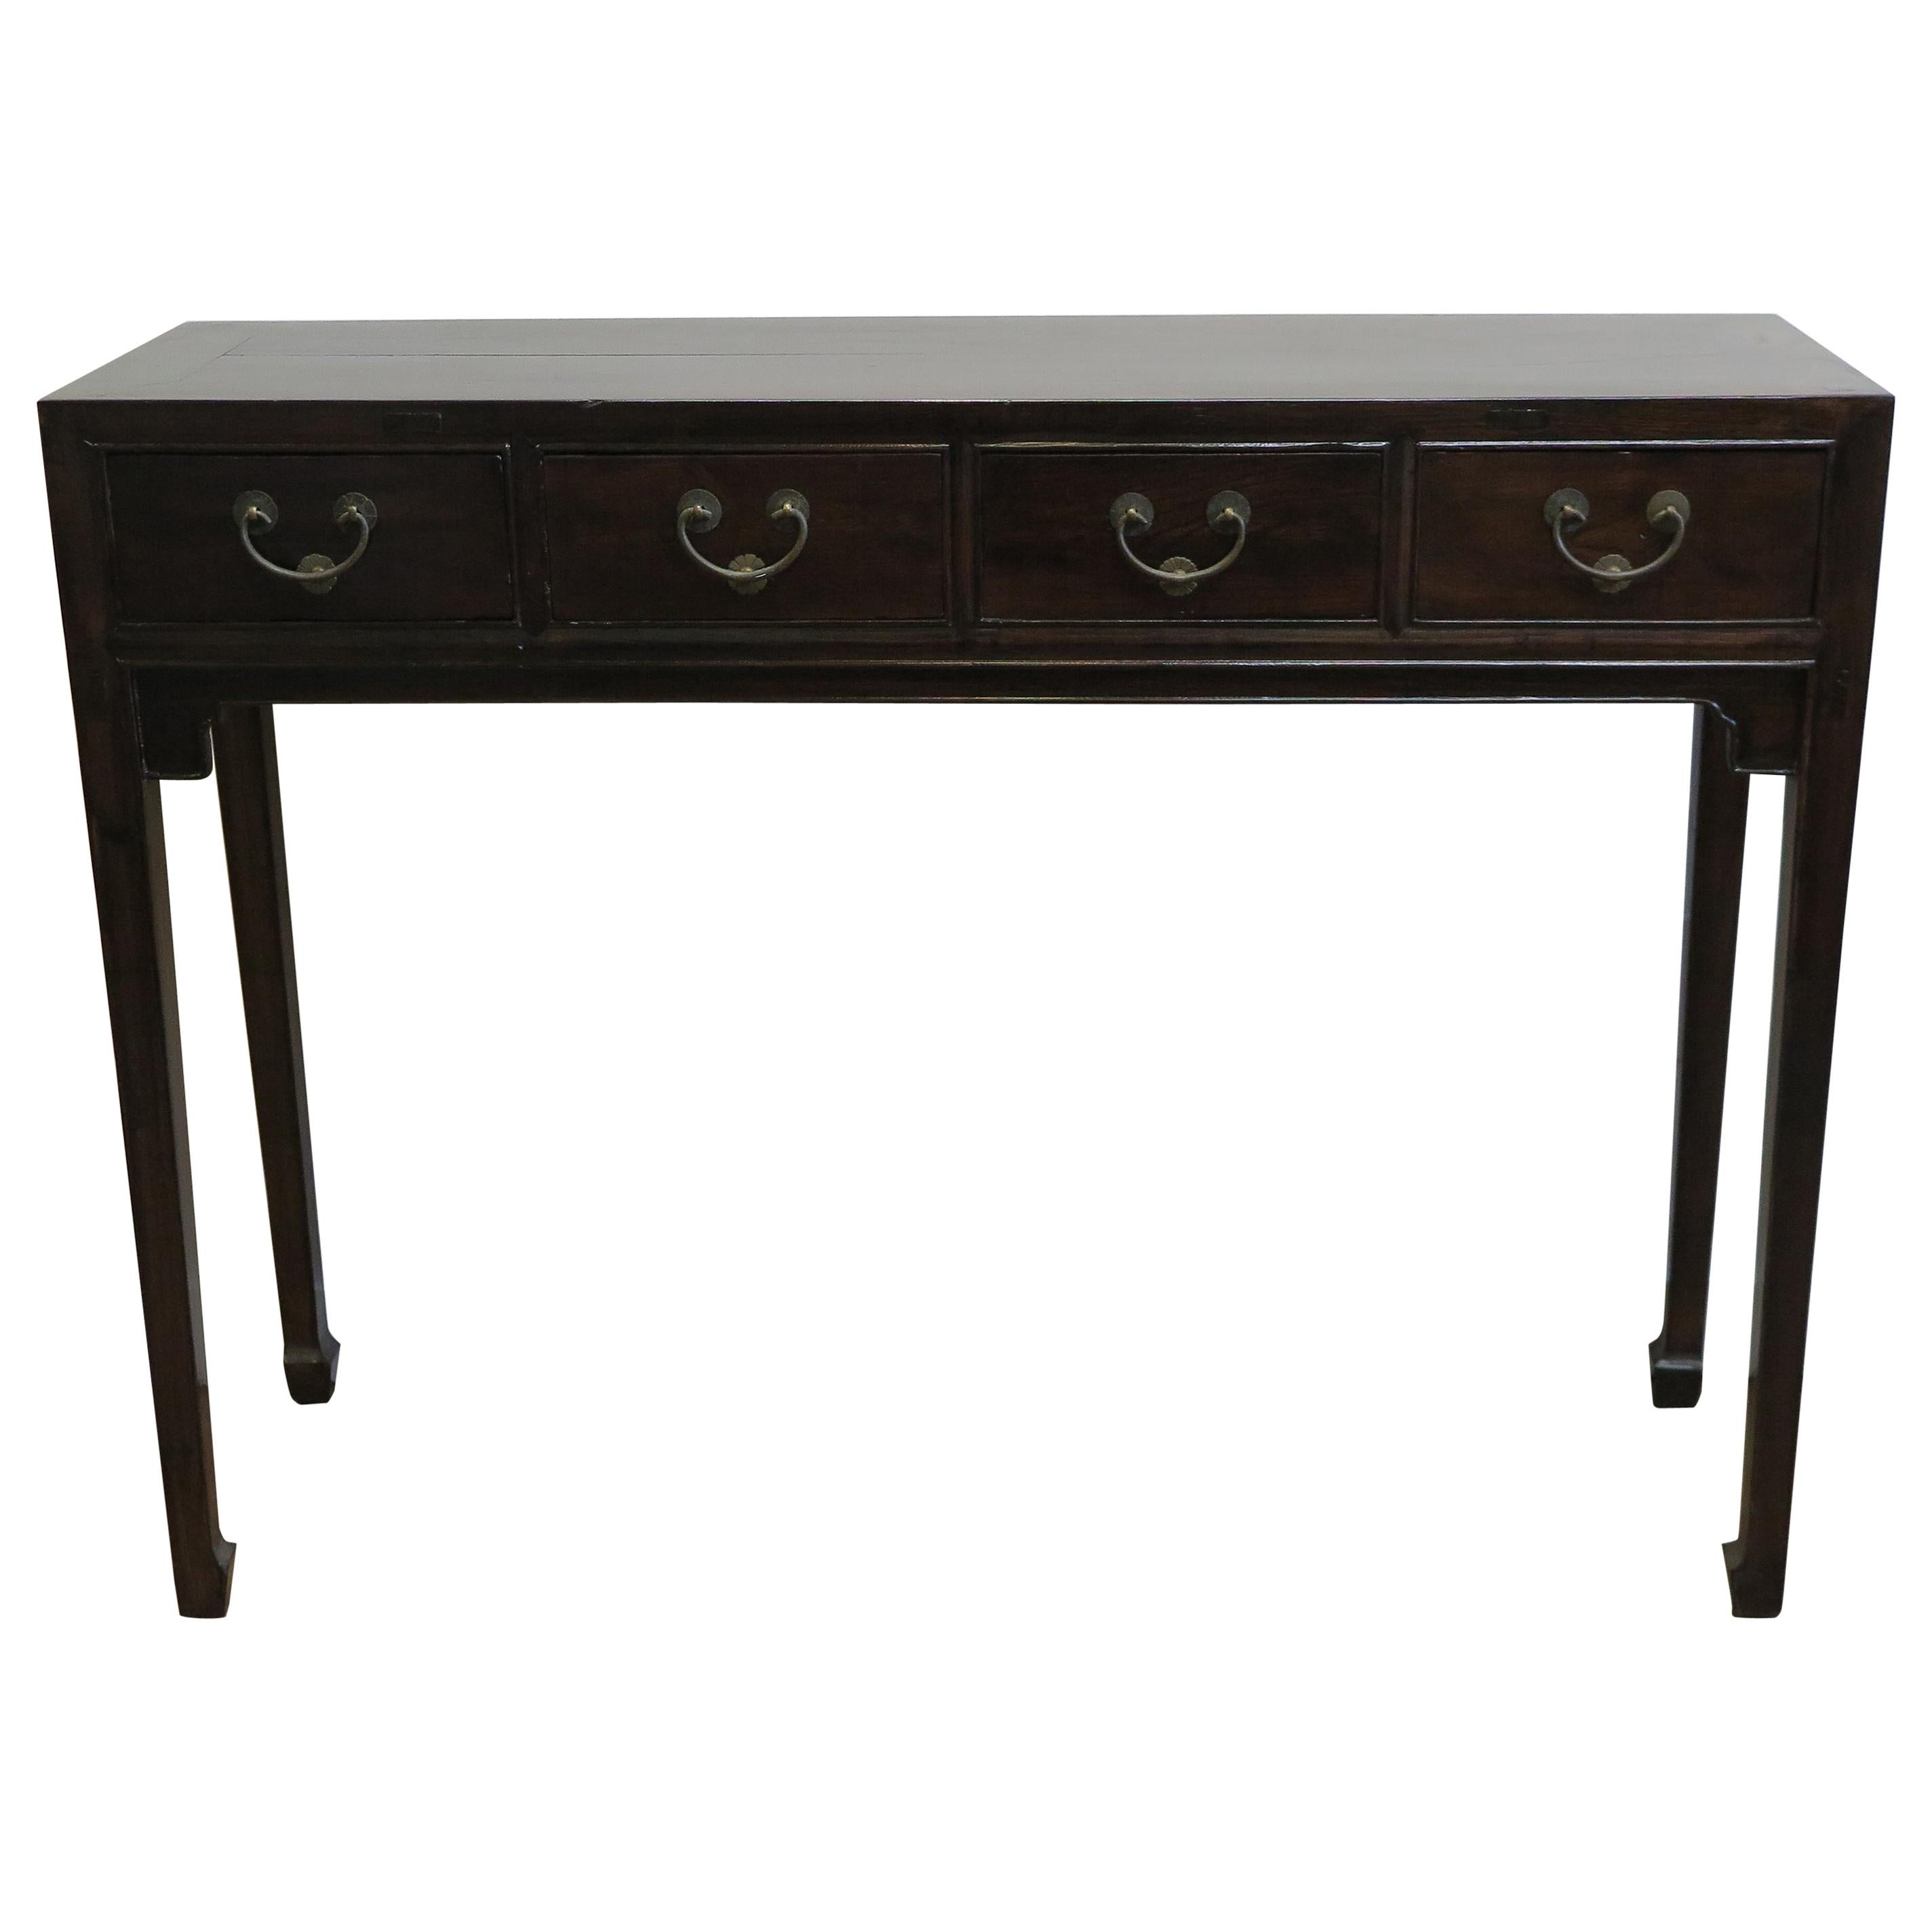 19th Century Console Table